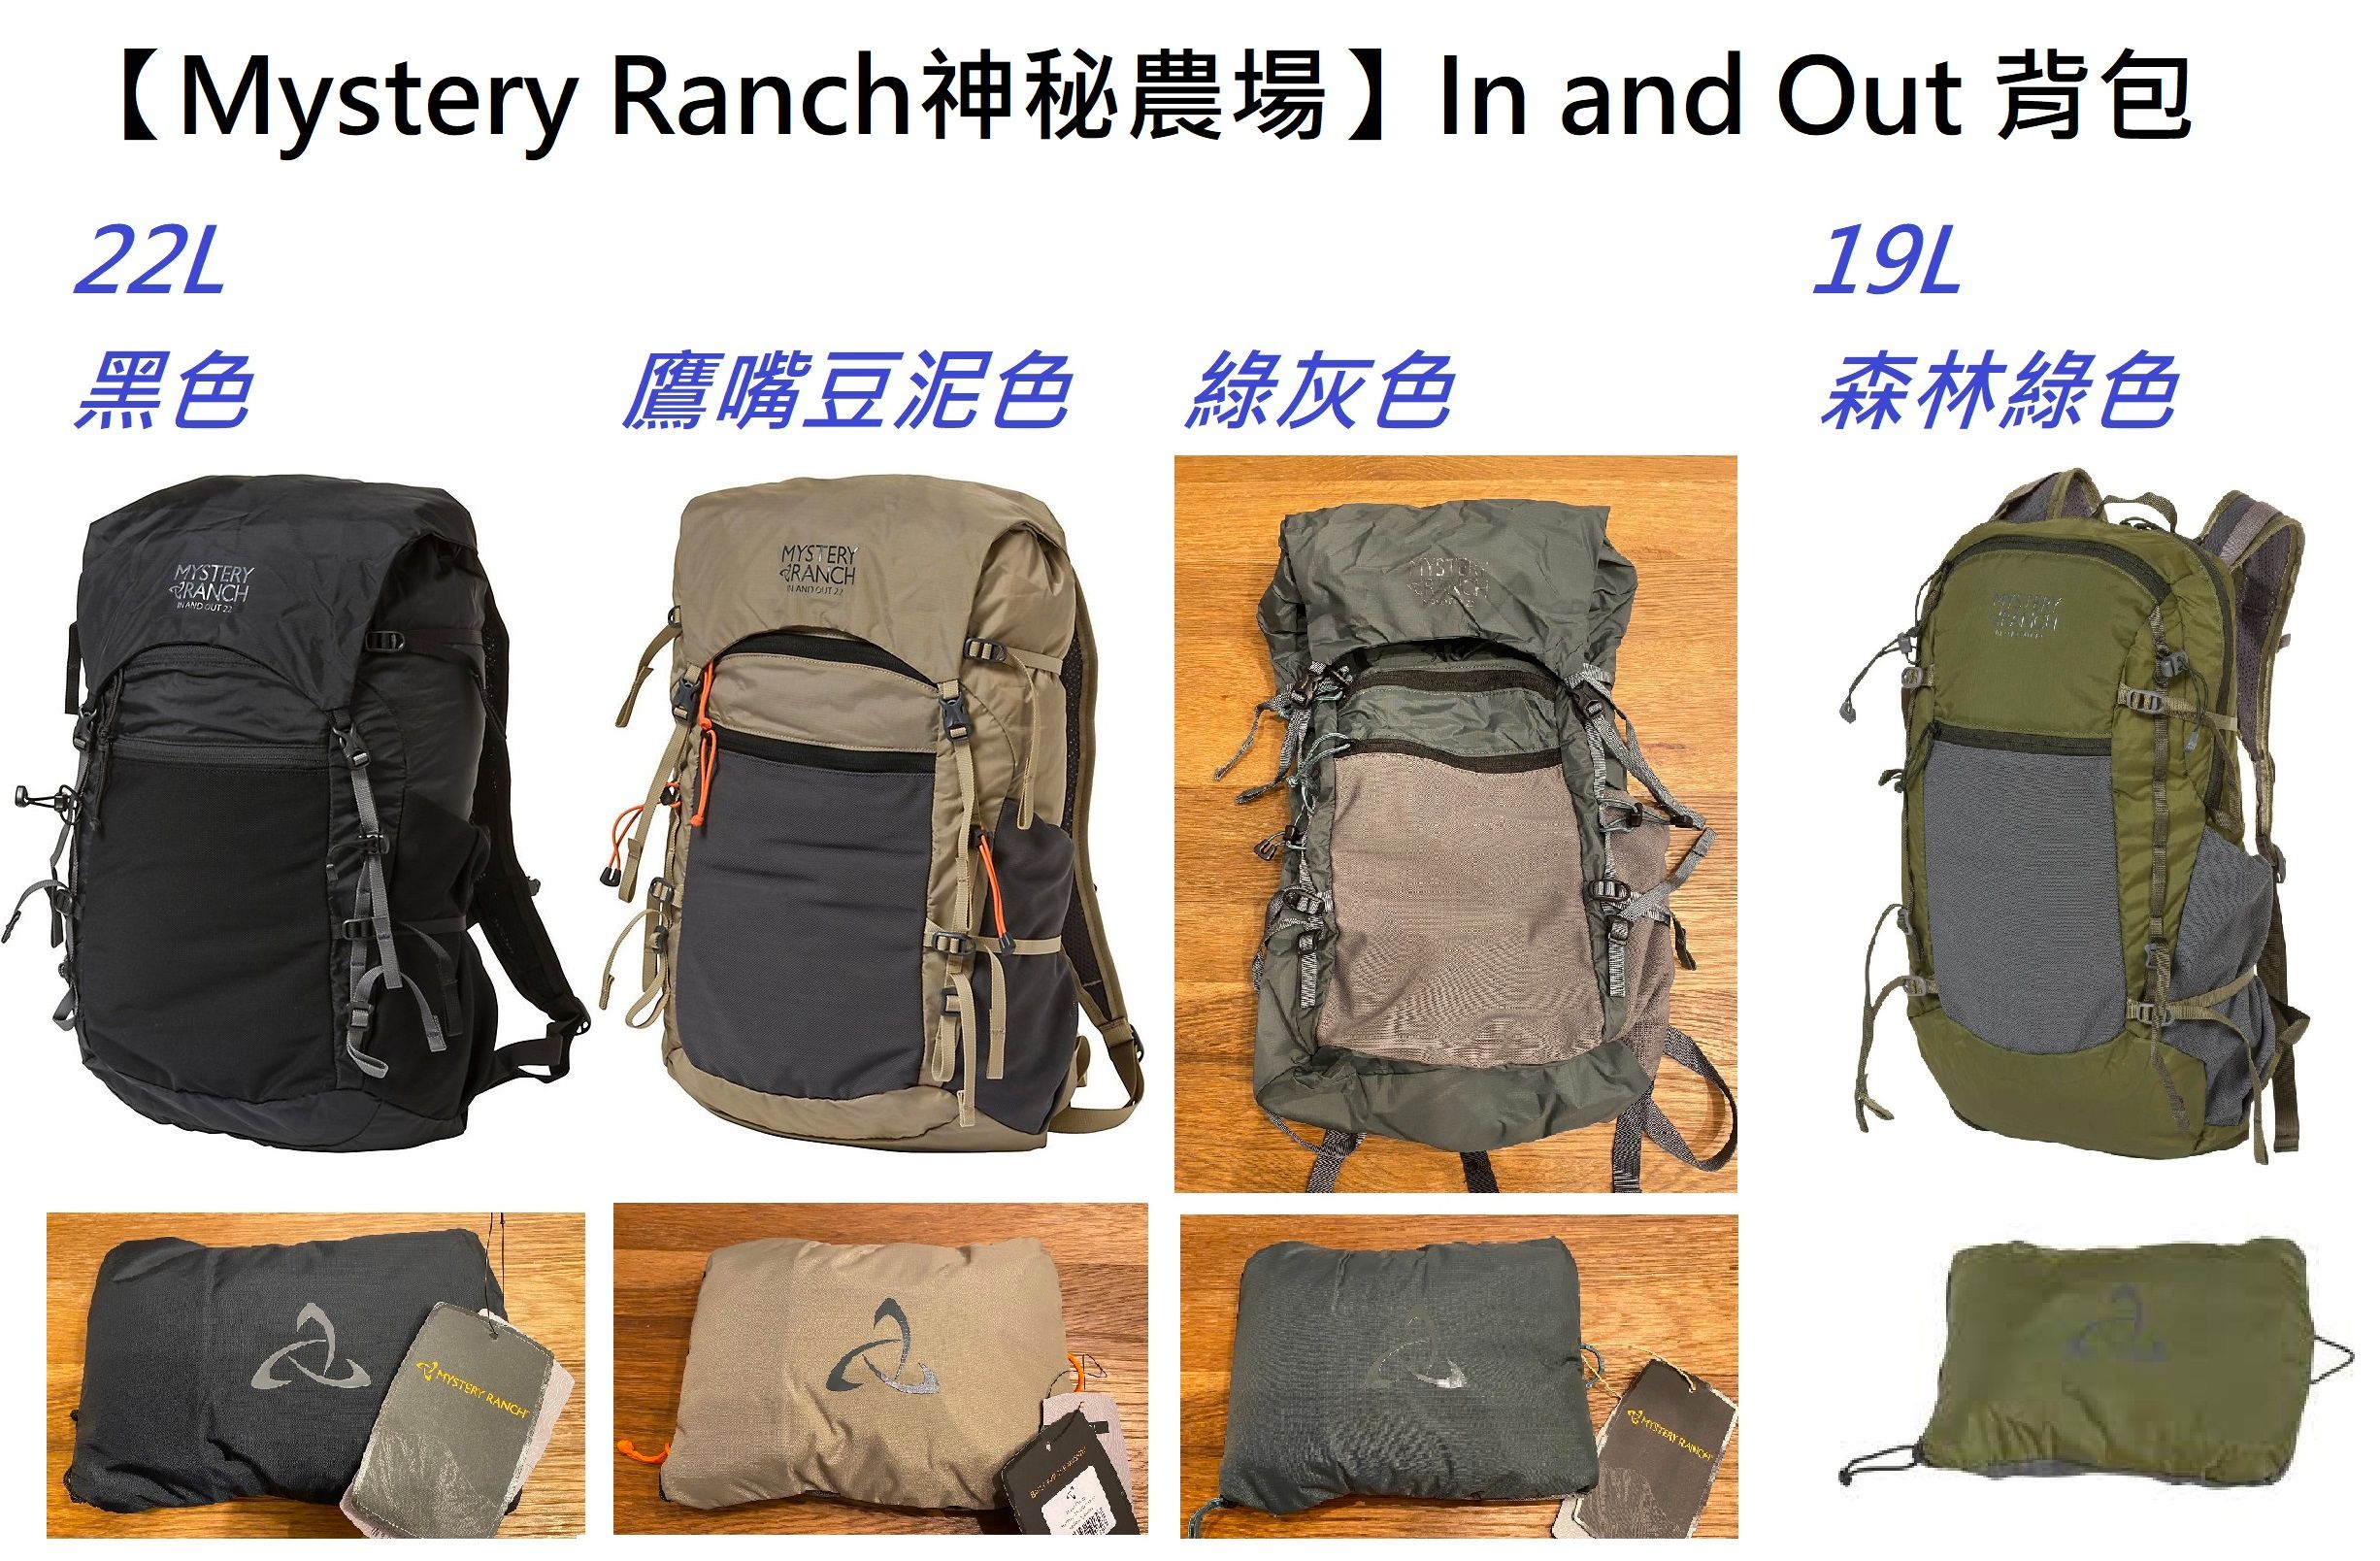 【Mystery Ranch神秘農場】In and Out 19L／22L 輕量攻頂包/一日包